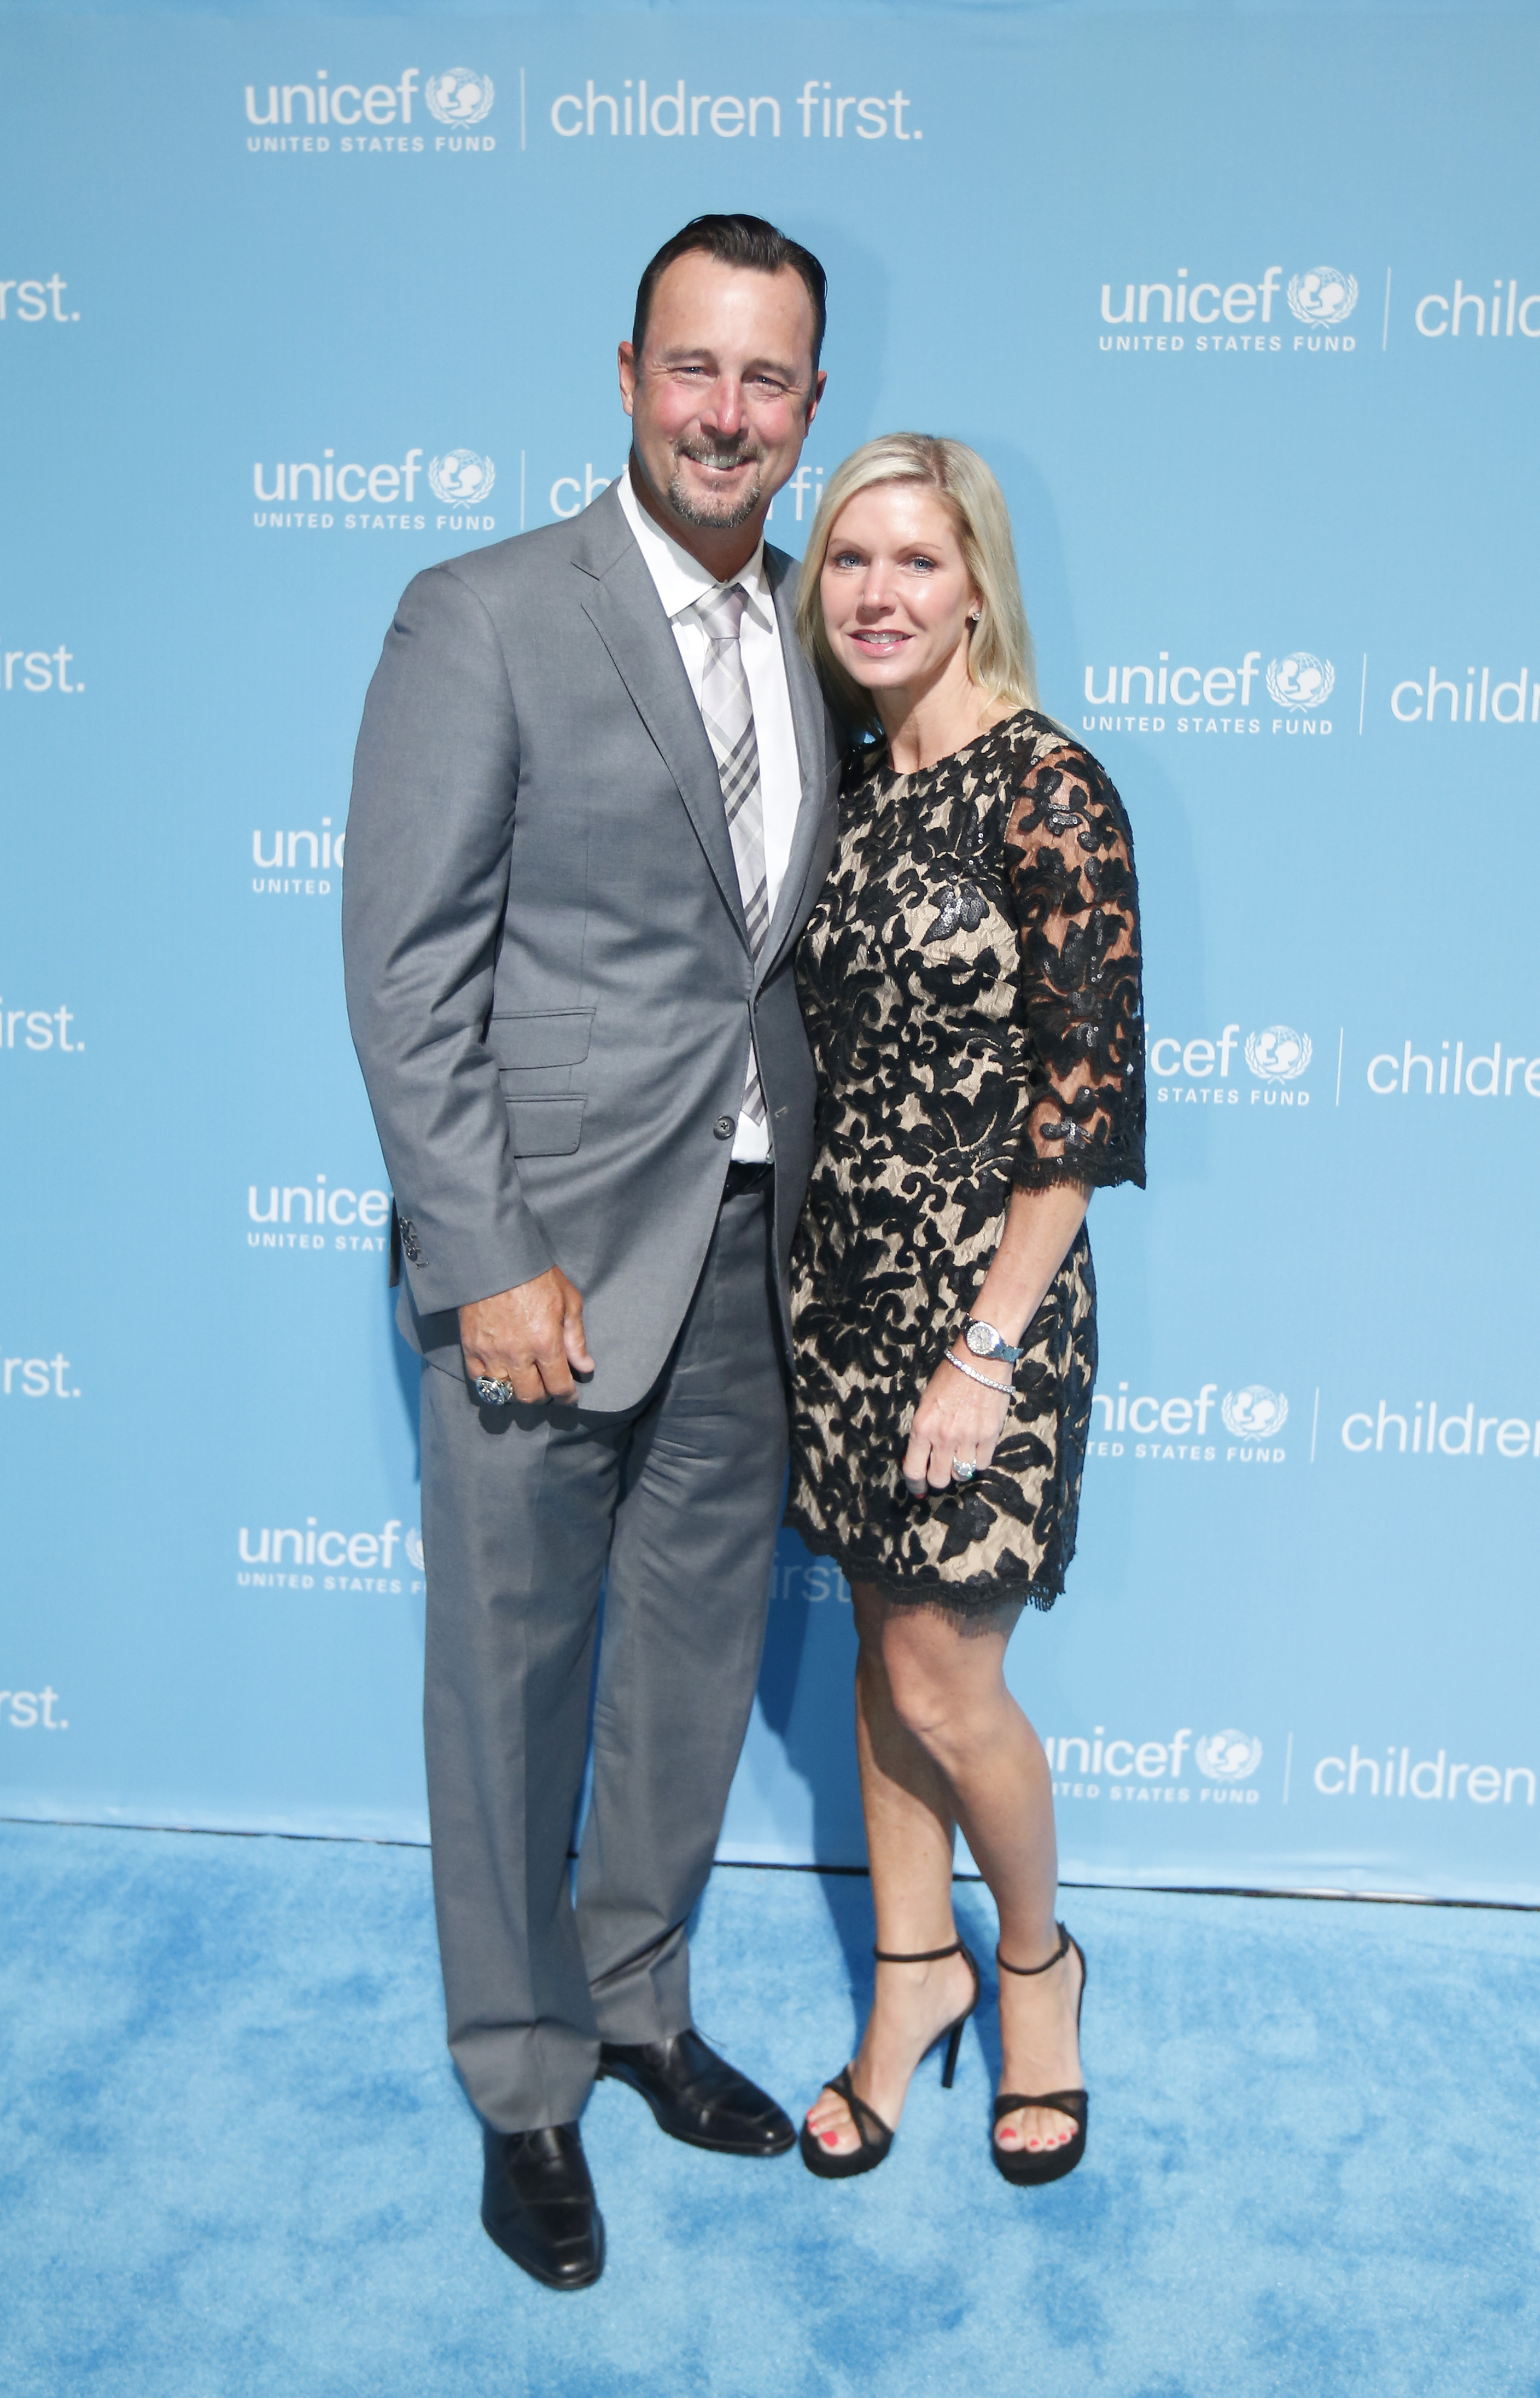 Tim and Stacy Wakefield at the UNICEF Children's Champion Award Dinner in Boston, Massachusetts on June 2, 2016 | Source: Getty Images